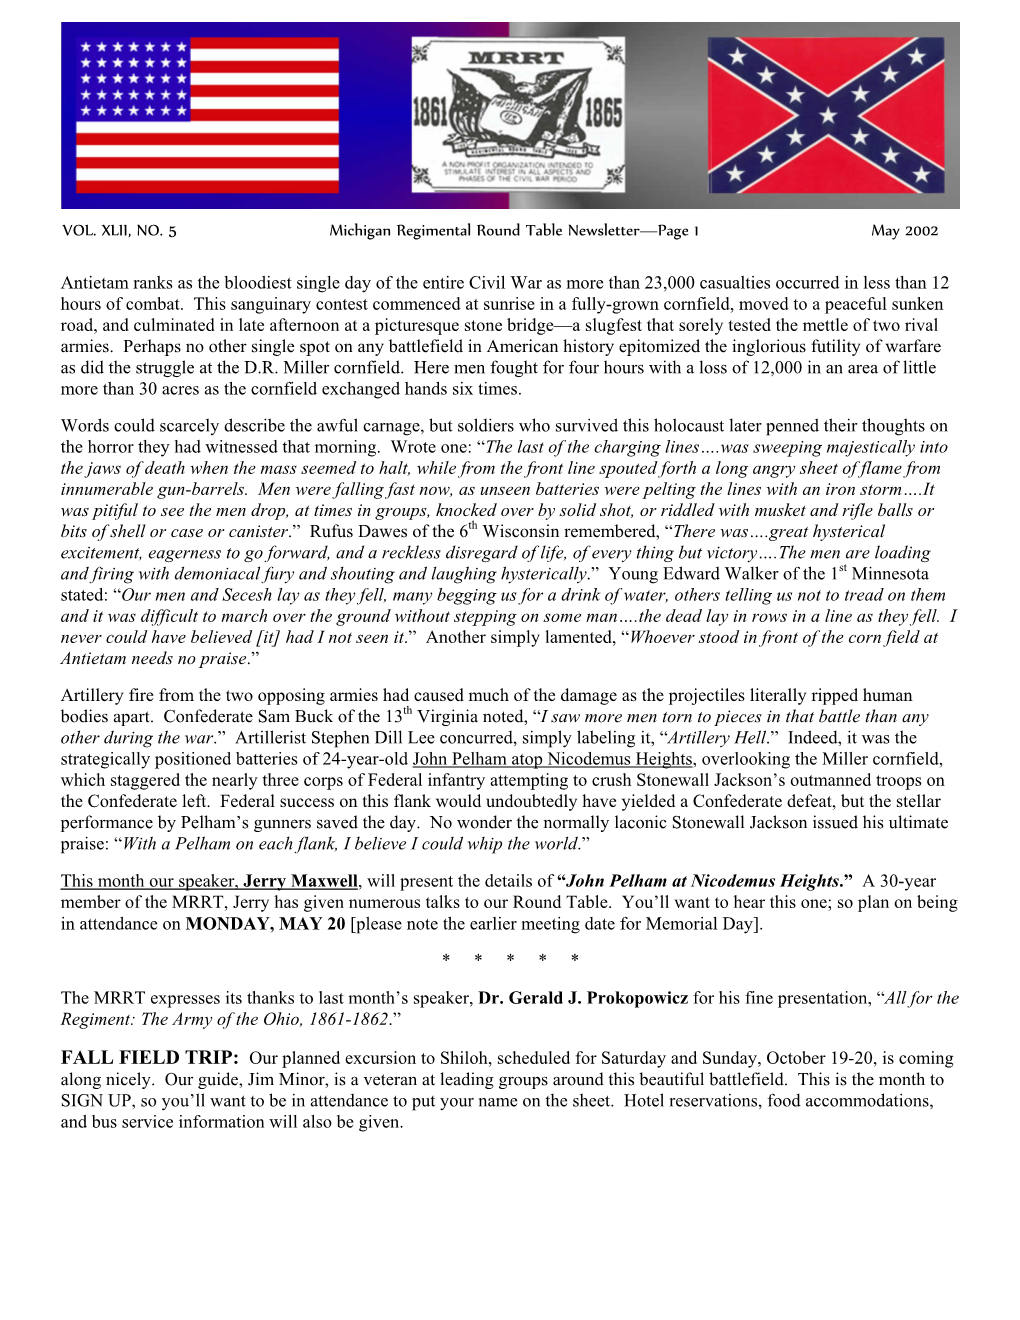 VOL. XLII, NO. 5 Michigan Regimental Round Table Newsletter—Page 1 May 2002